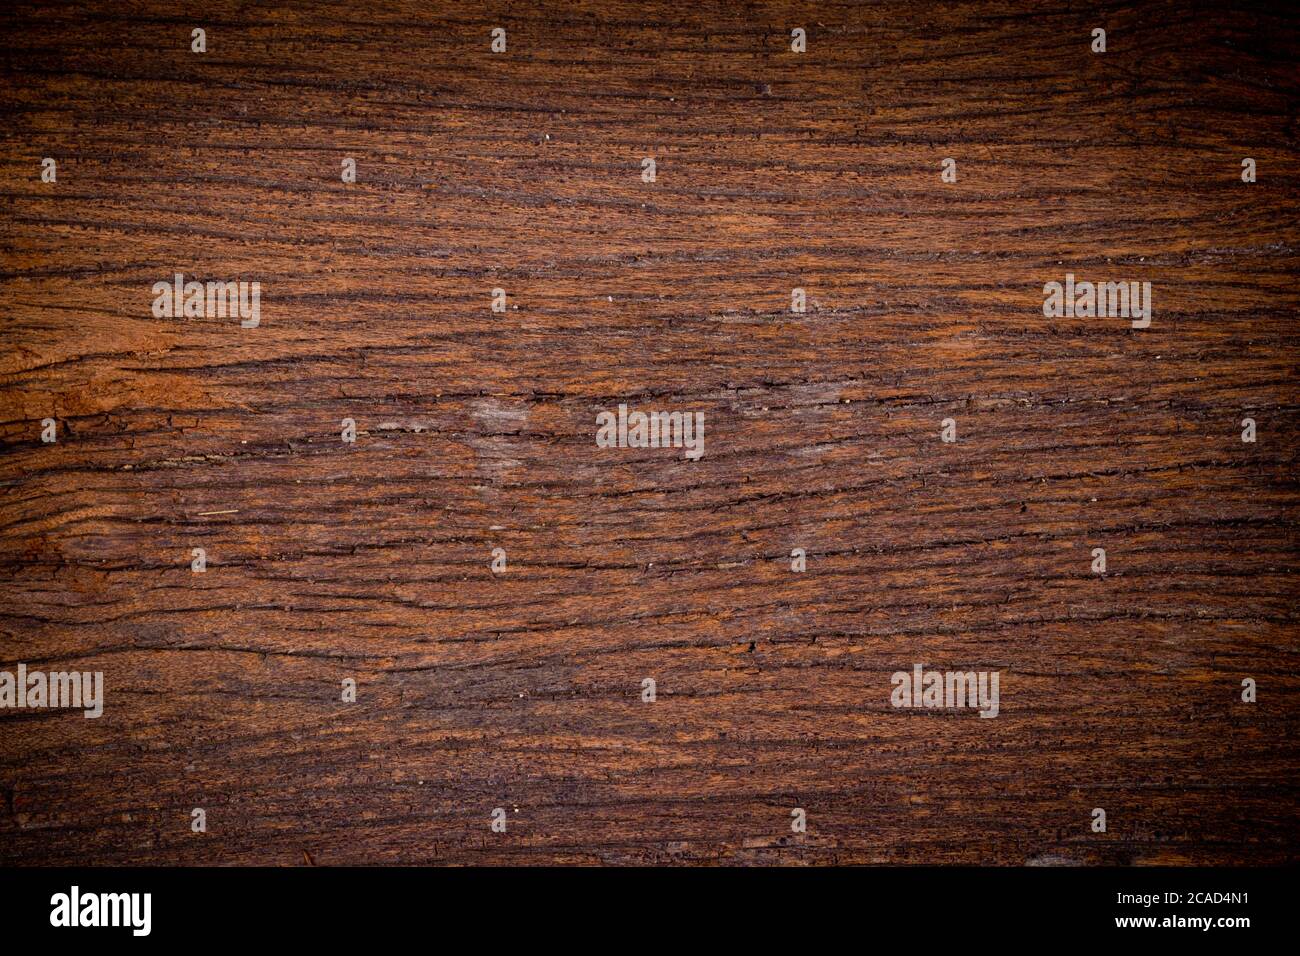 Brown wood texture nature. Abstract old wood texture background. Stock Photo